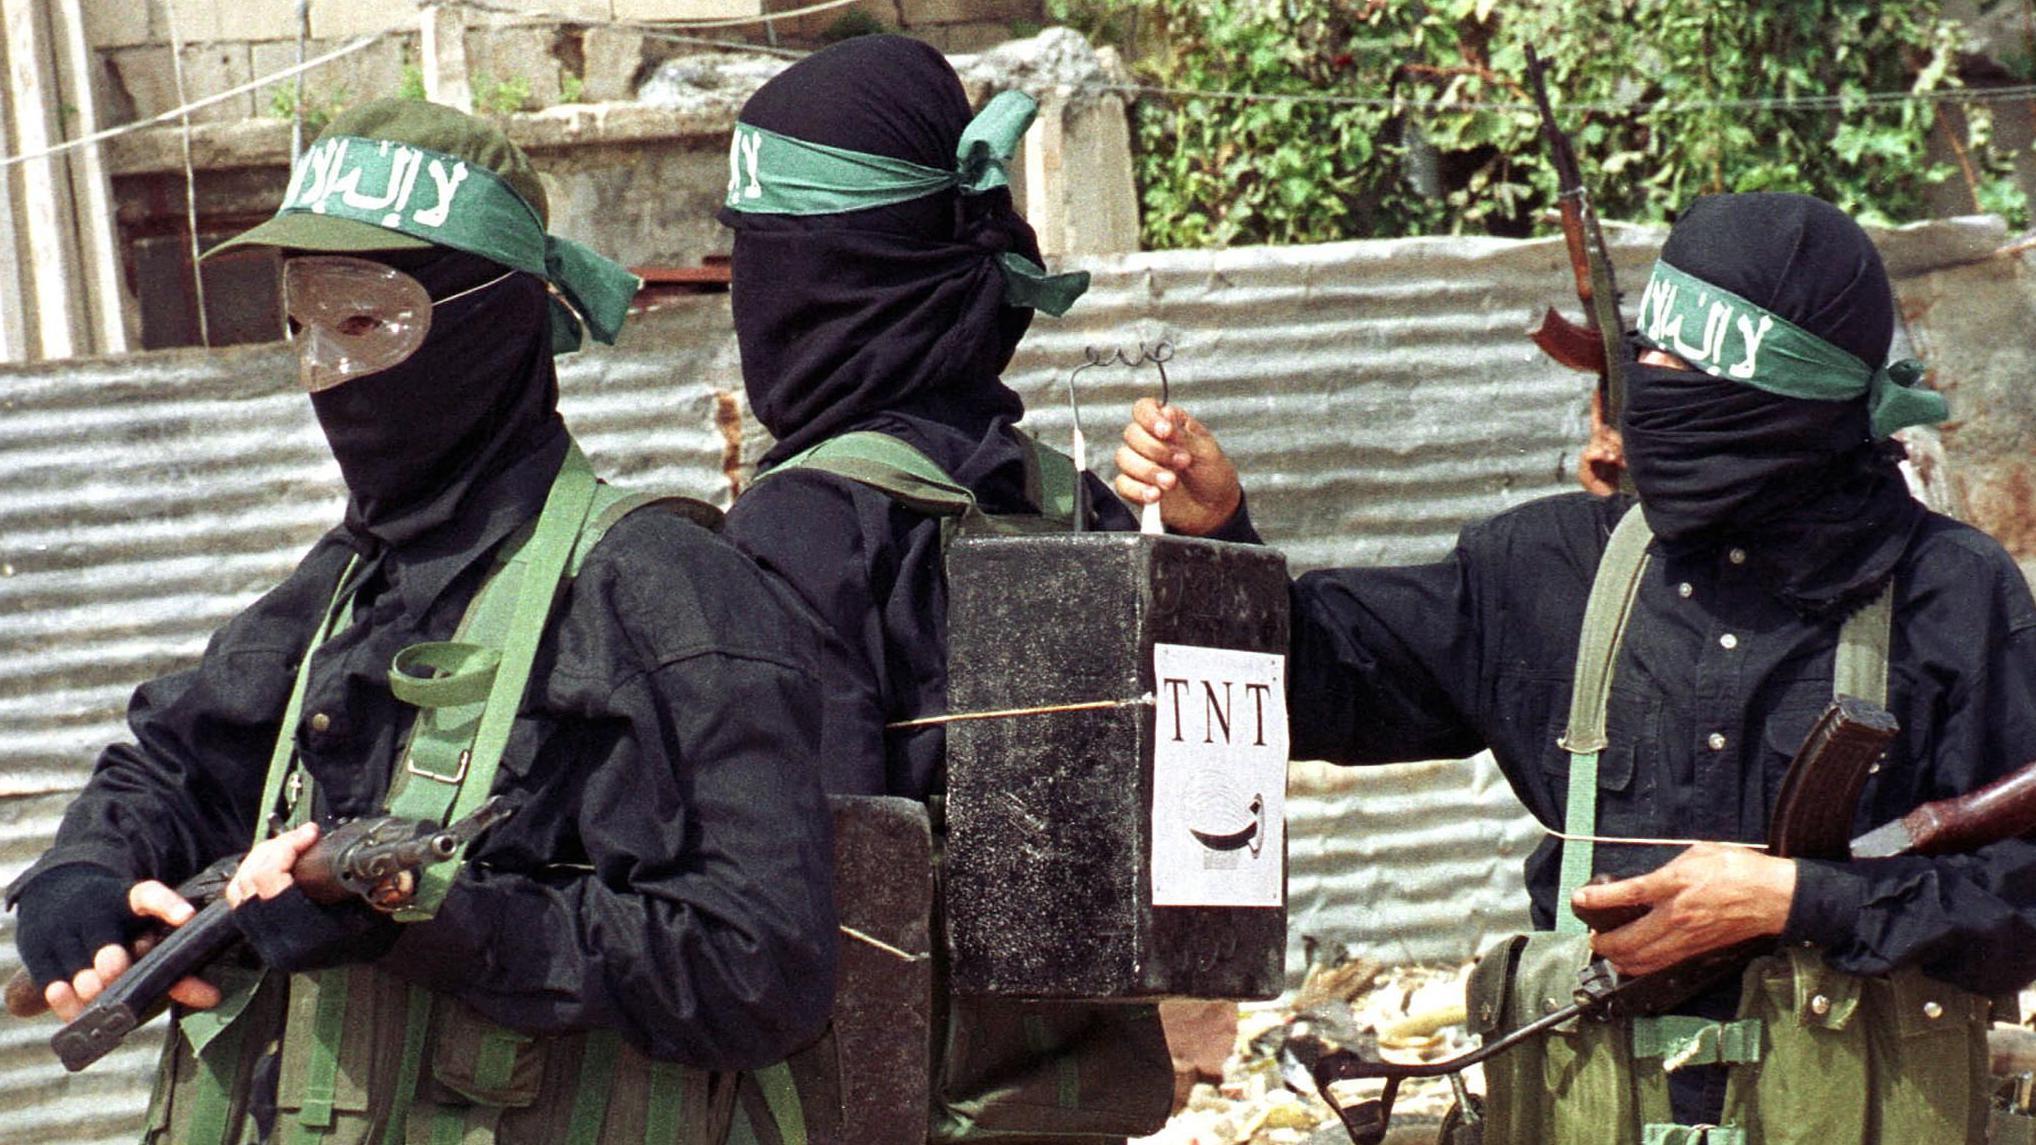 One Palestinian militant strap boxes, mark as TNT explosives, on di back of one of im comrades, clearly as a sign say dem dey prepare to carry out suicide bombings, during anti-Israeli protest for di Palestinian refugee camp of Ain al-Hilweh for di outskirts of di southern Lebanese port of Sidon October 2000